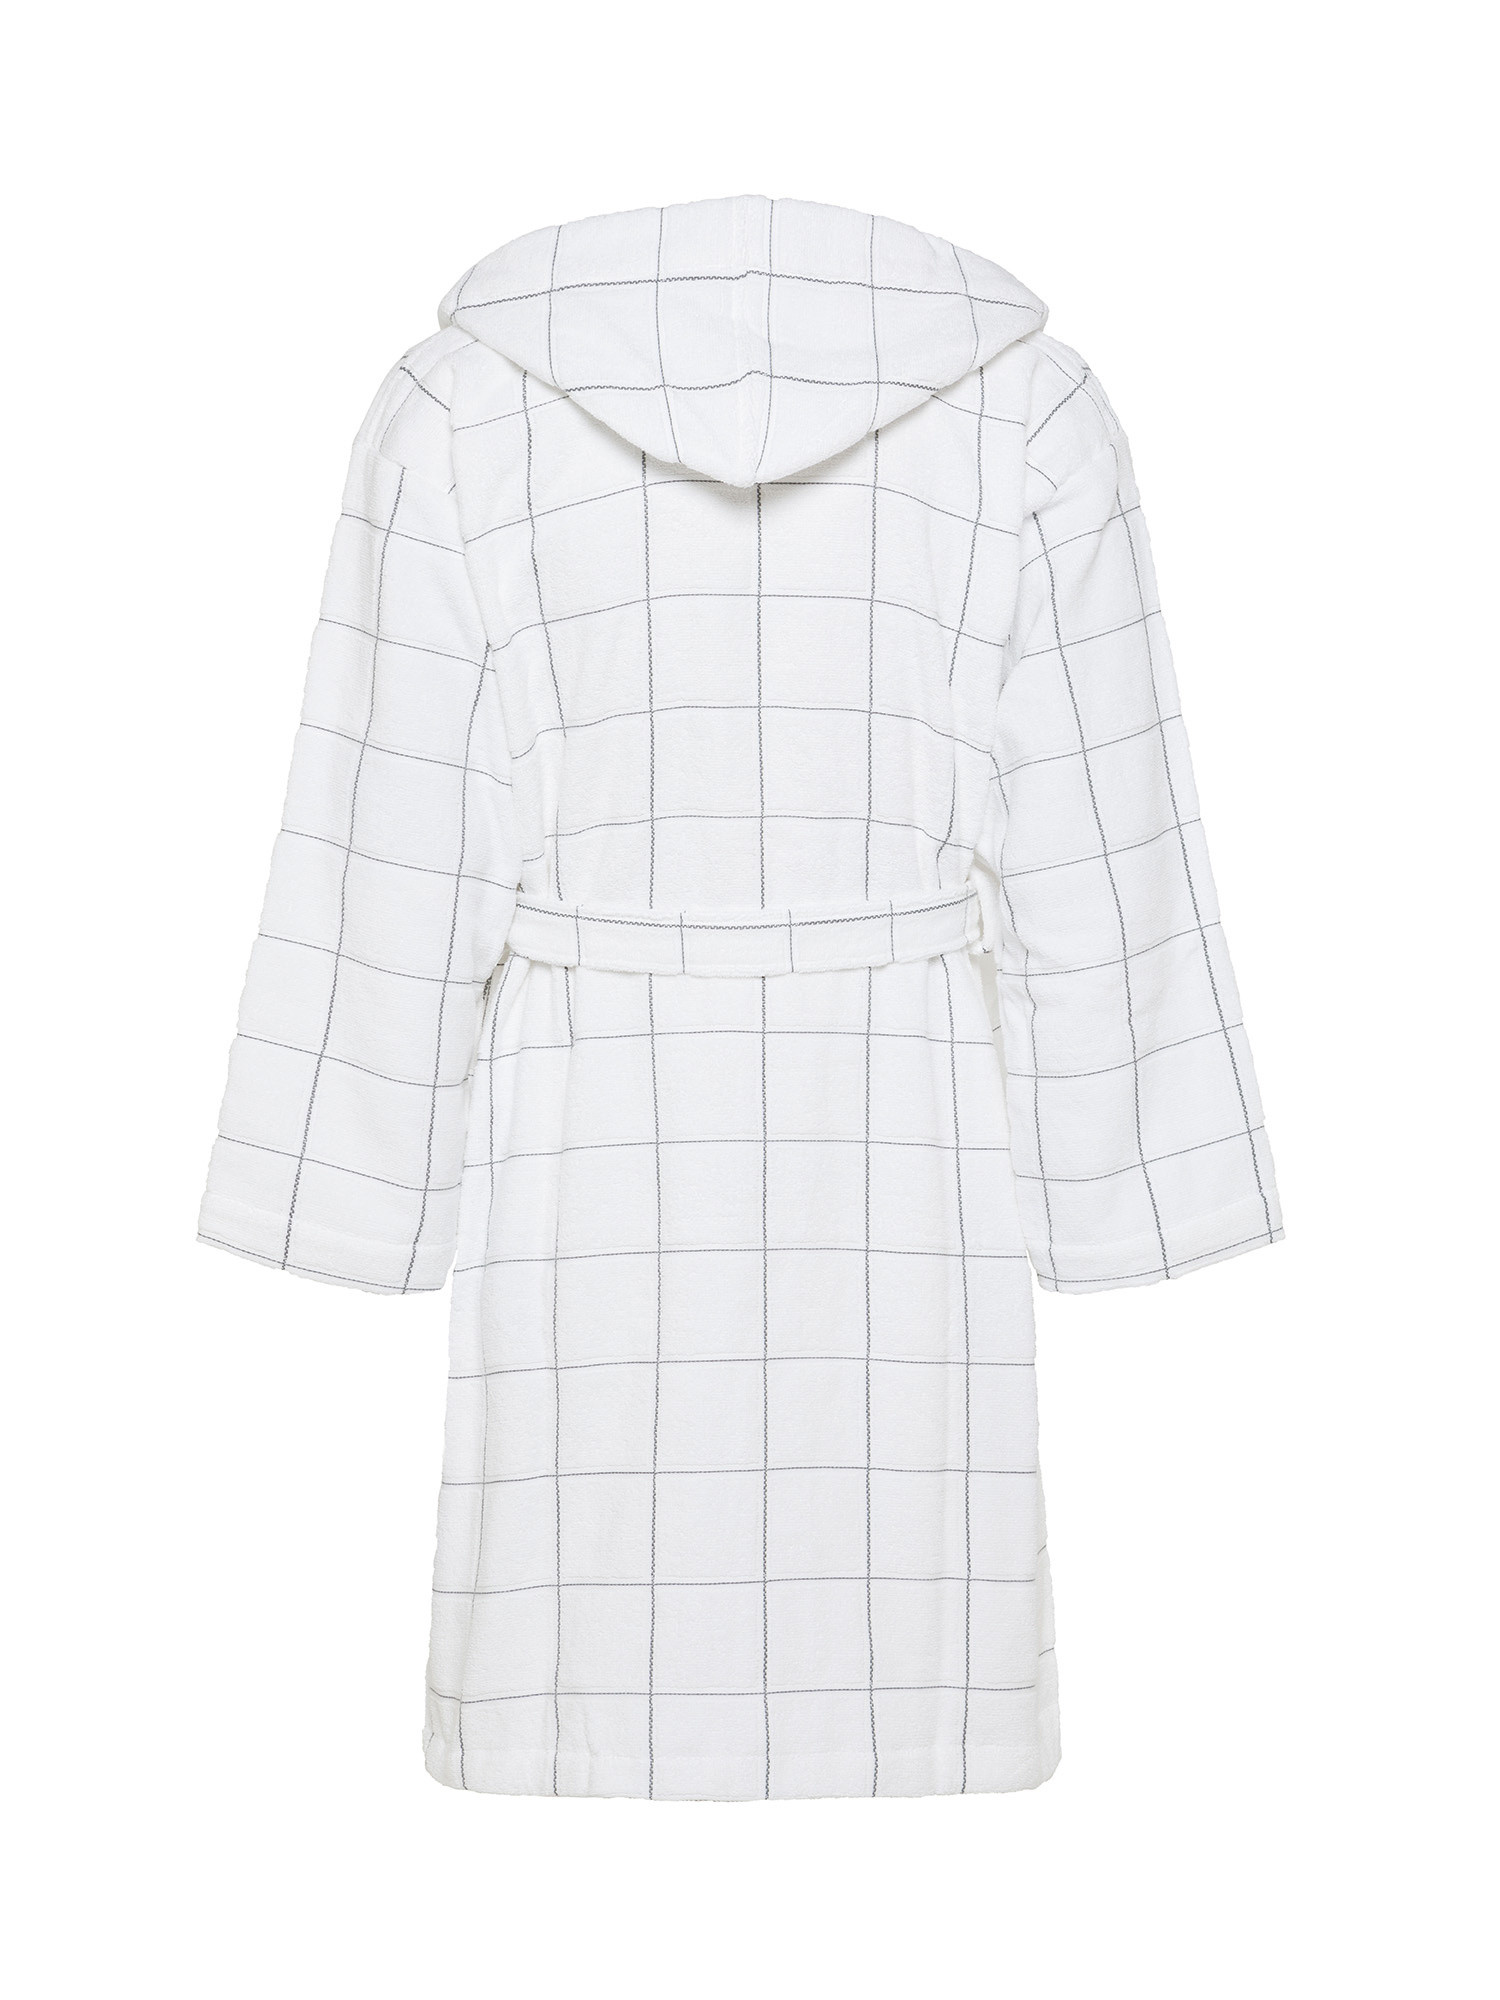 Bathrobe in pure yarn-dyed checked cotton, White, large image number 1